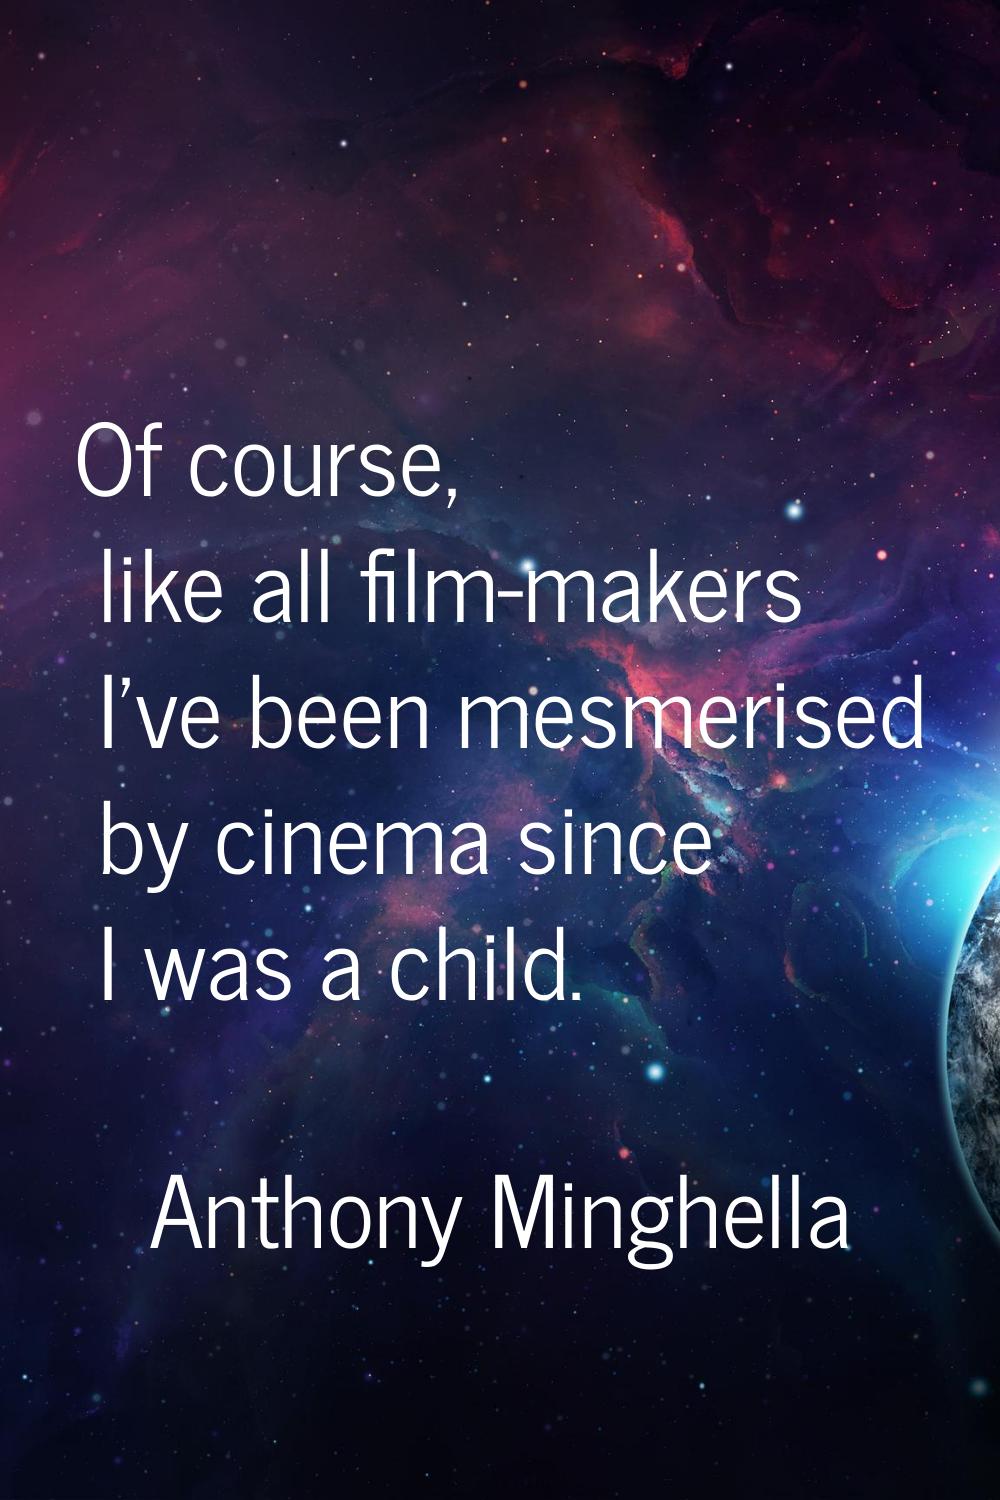 Of course, like all film-makers I've been mesmerised by cinema since I was a child.